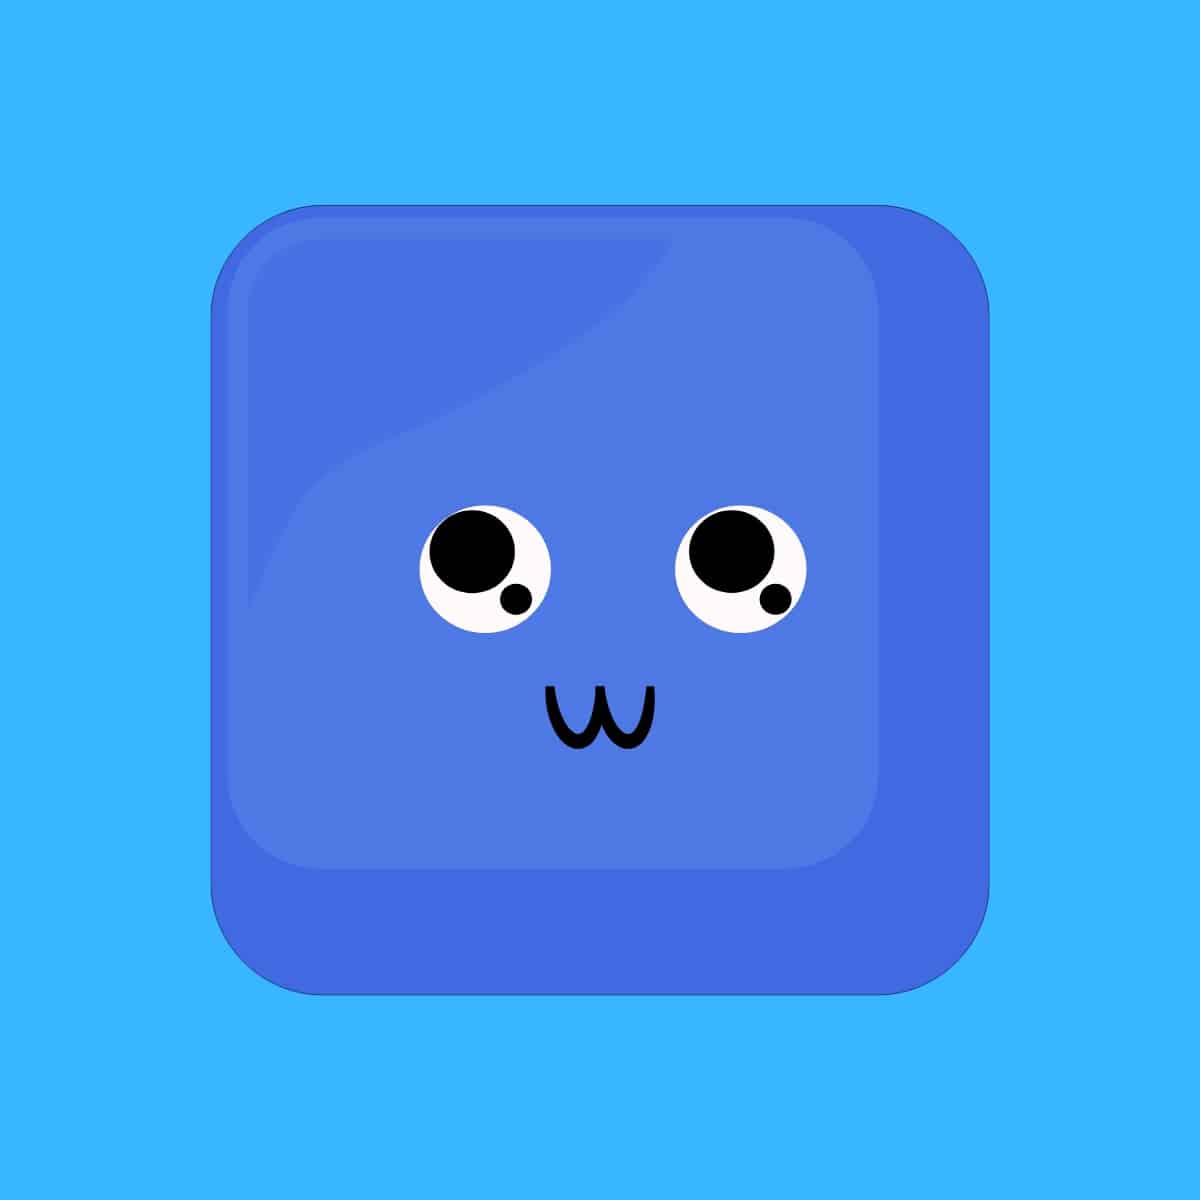 Cartoon graphic of a blue square smiling on blue background.